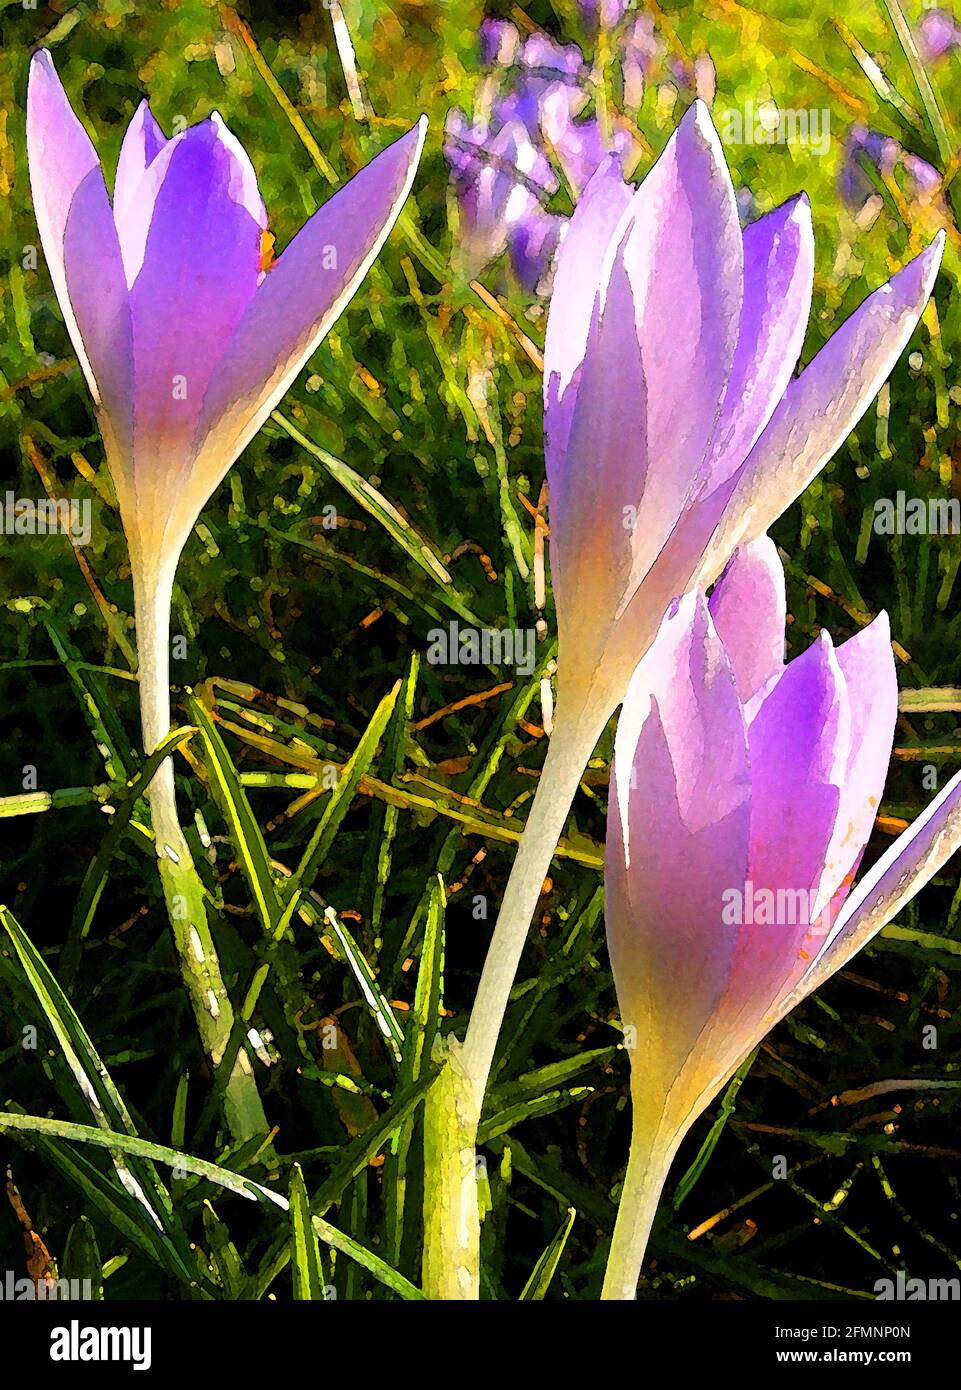 Crocus (Crocus albiflorus) One of Forty-two Iconic Images of English Garden Flowers, Wildflowers and Rural Landscapes. Stock Photo